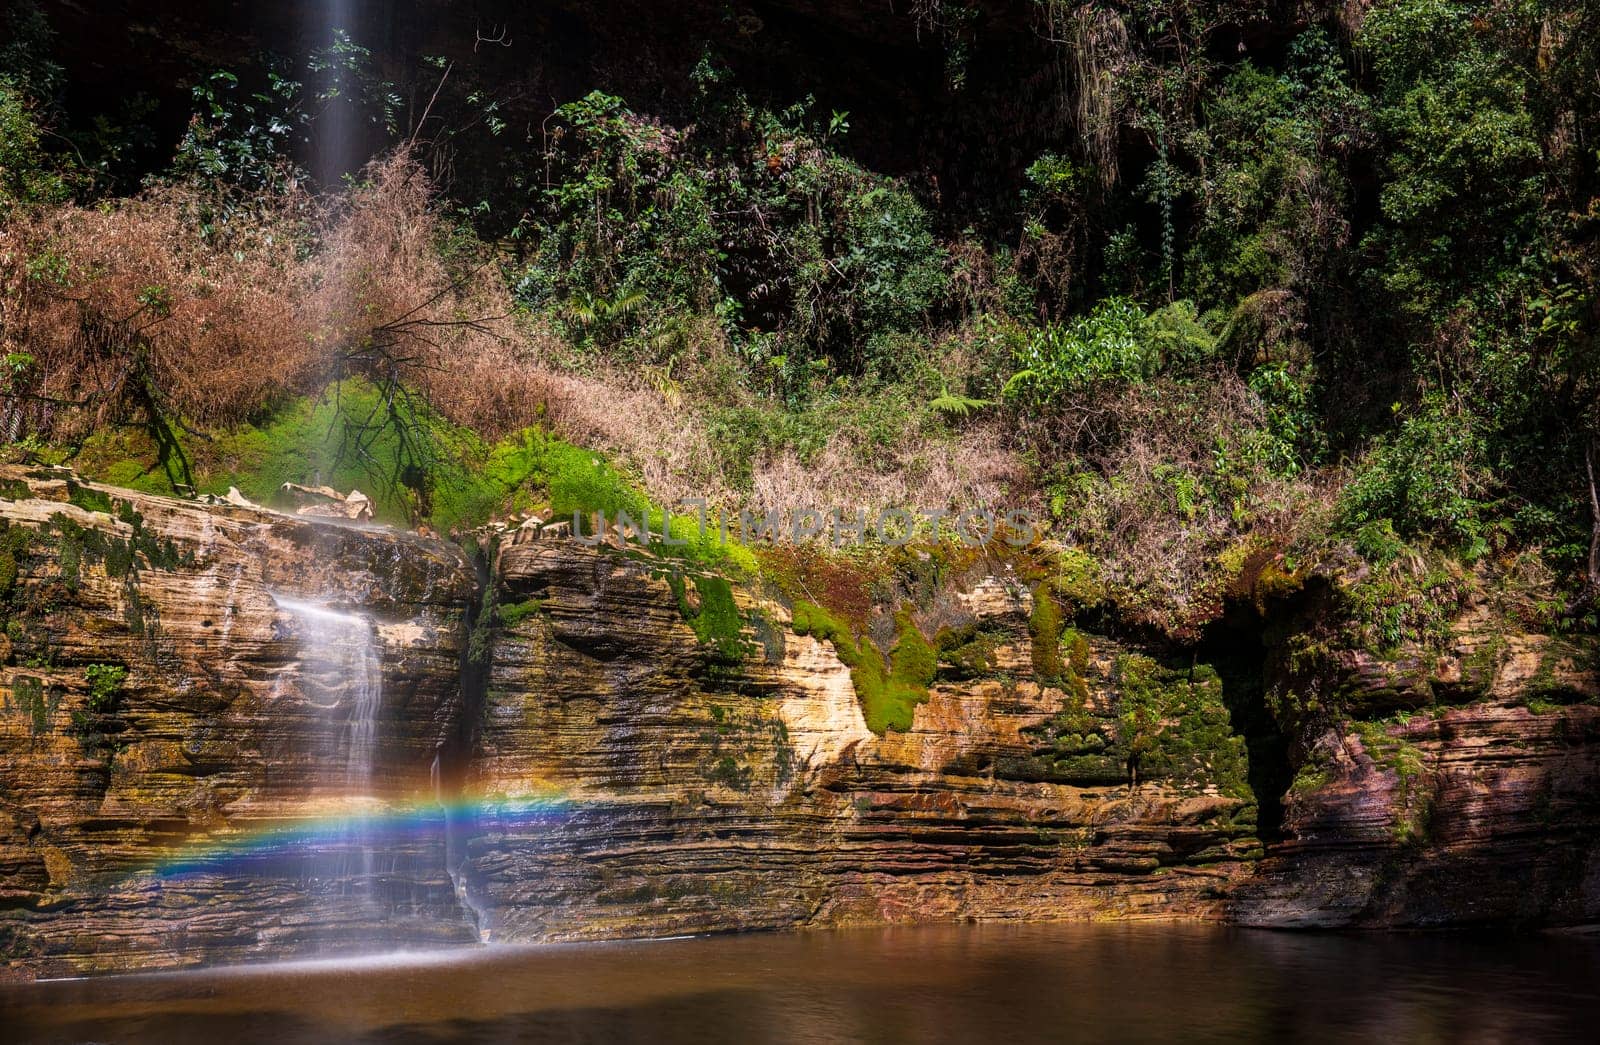 Secluded waterfall creates a rainbow in a dense forest setting.